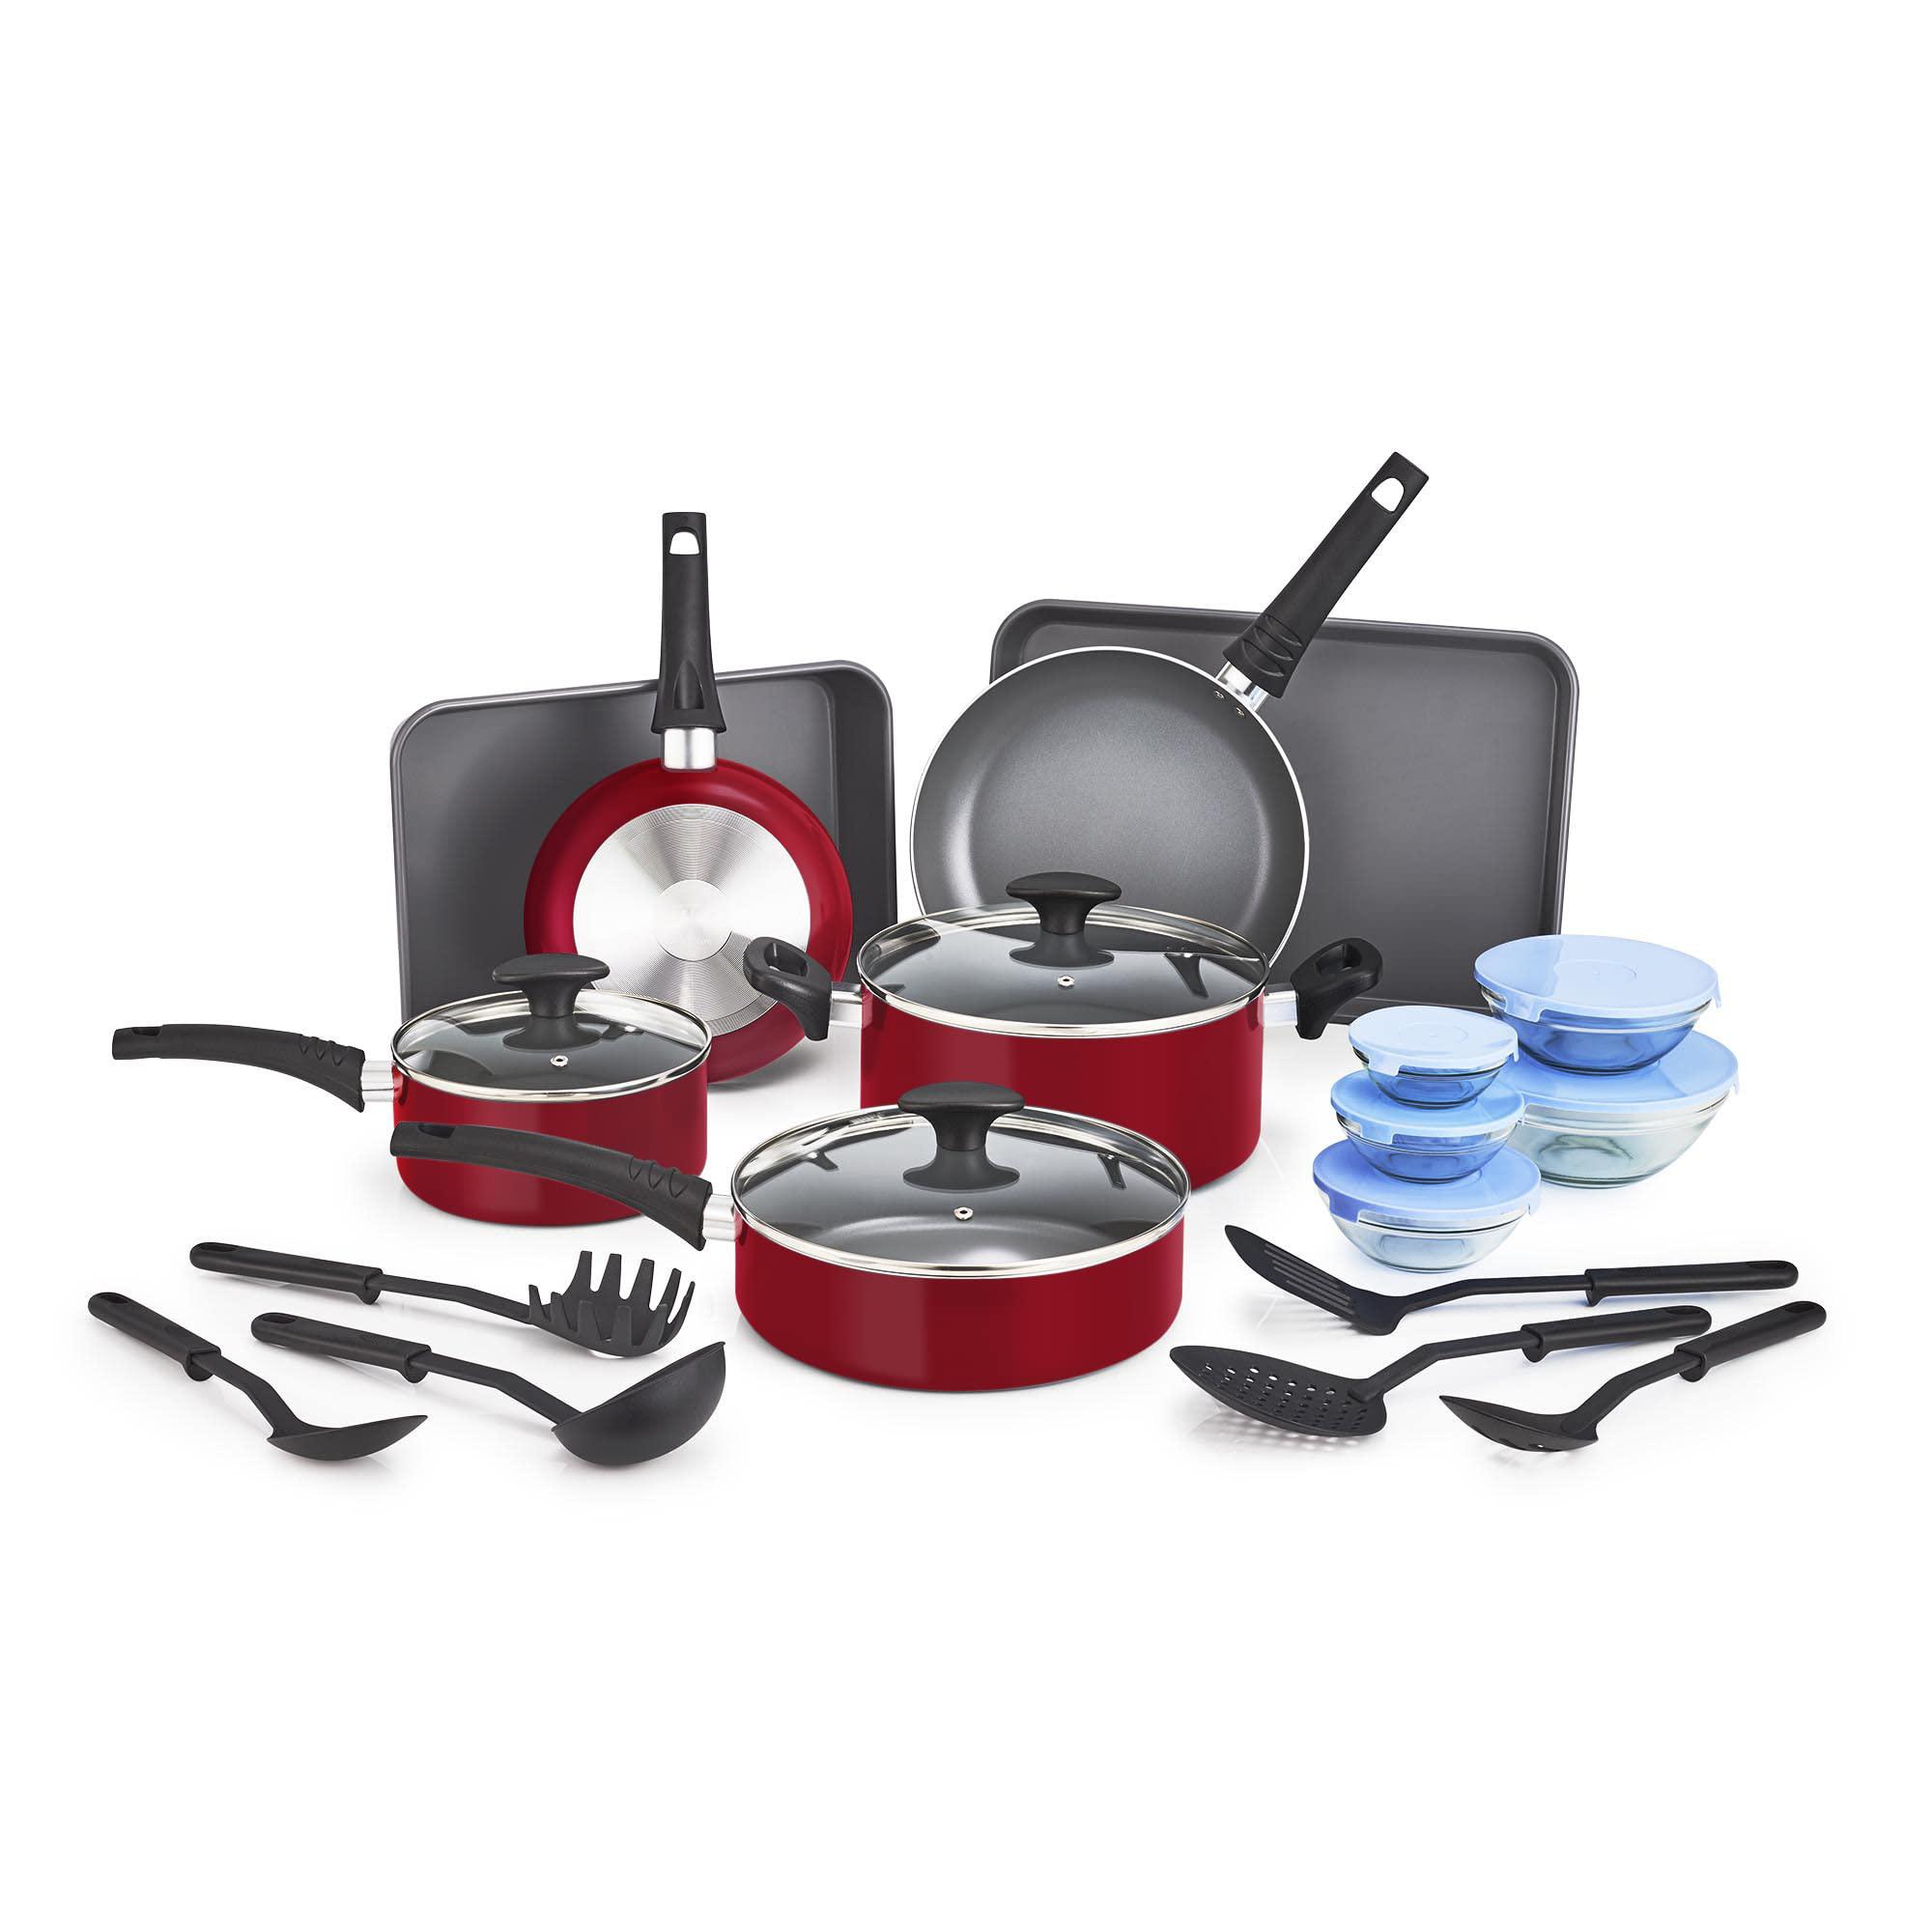 bella nonstick cookware set with glass lids - aluminum bakeware, pots and pans, storage bowls & utensils, compatible with all